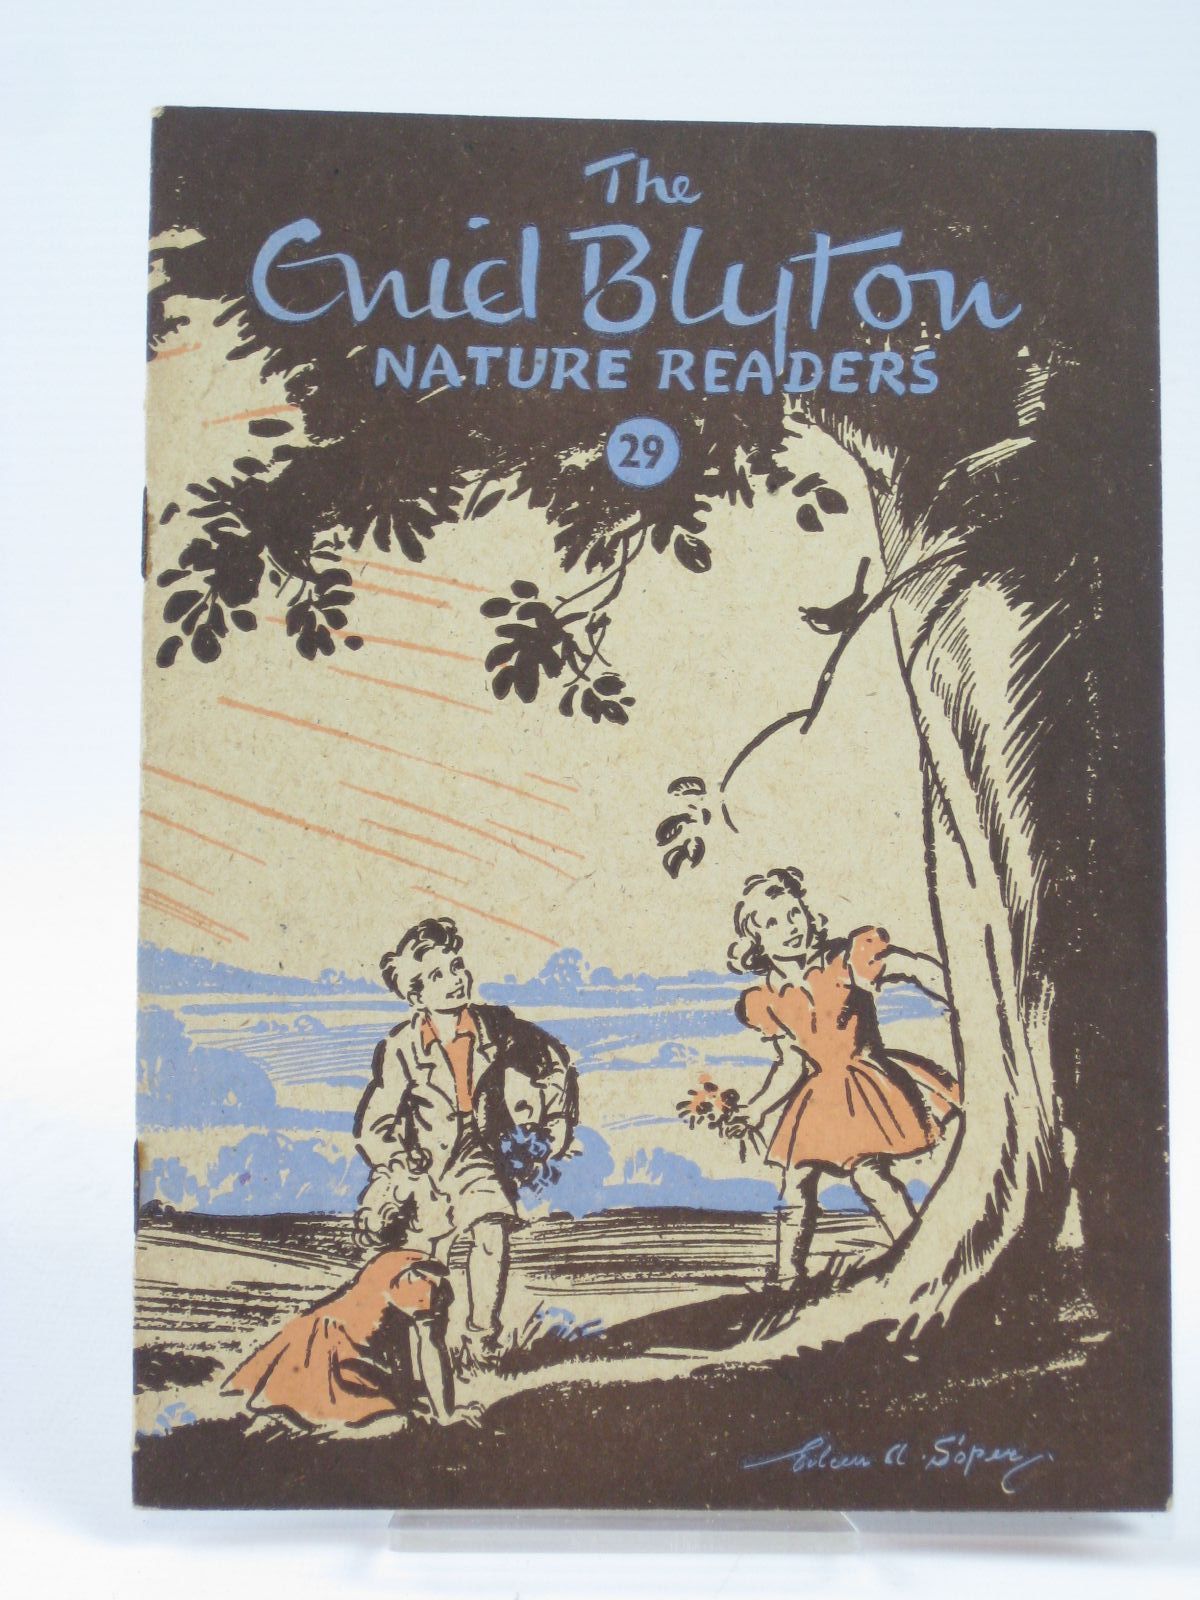 Photo of THE ENID BLYTON NATURE READERS No. 29 written by Blyton, Enid illustrated by Soper, Eileen published by Macmillan &amp; Co. Ltd. (STOCK CODE: 1406274)  for sale by Stella & Rose's Books